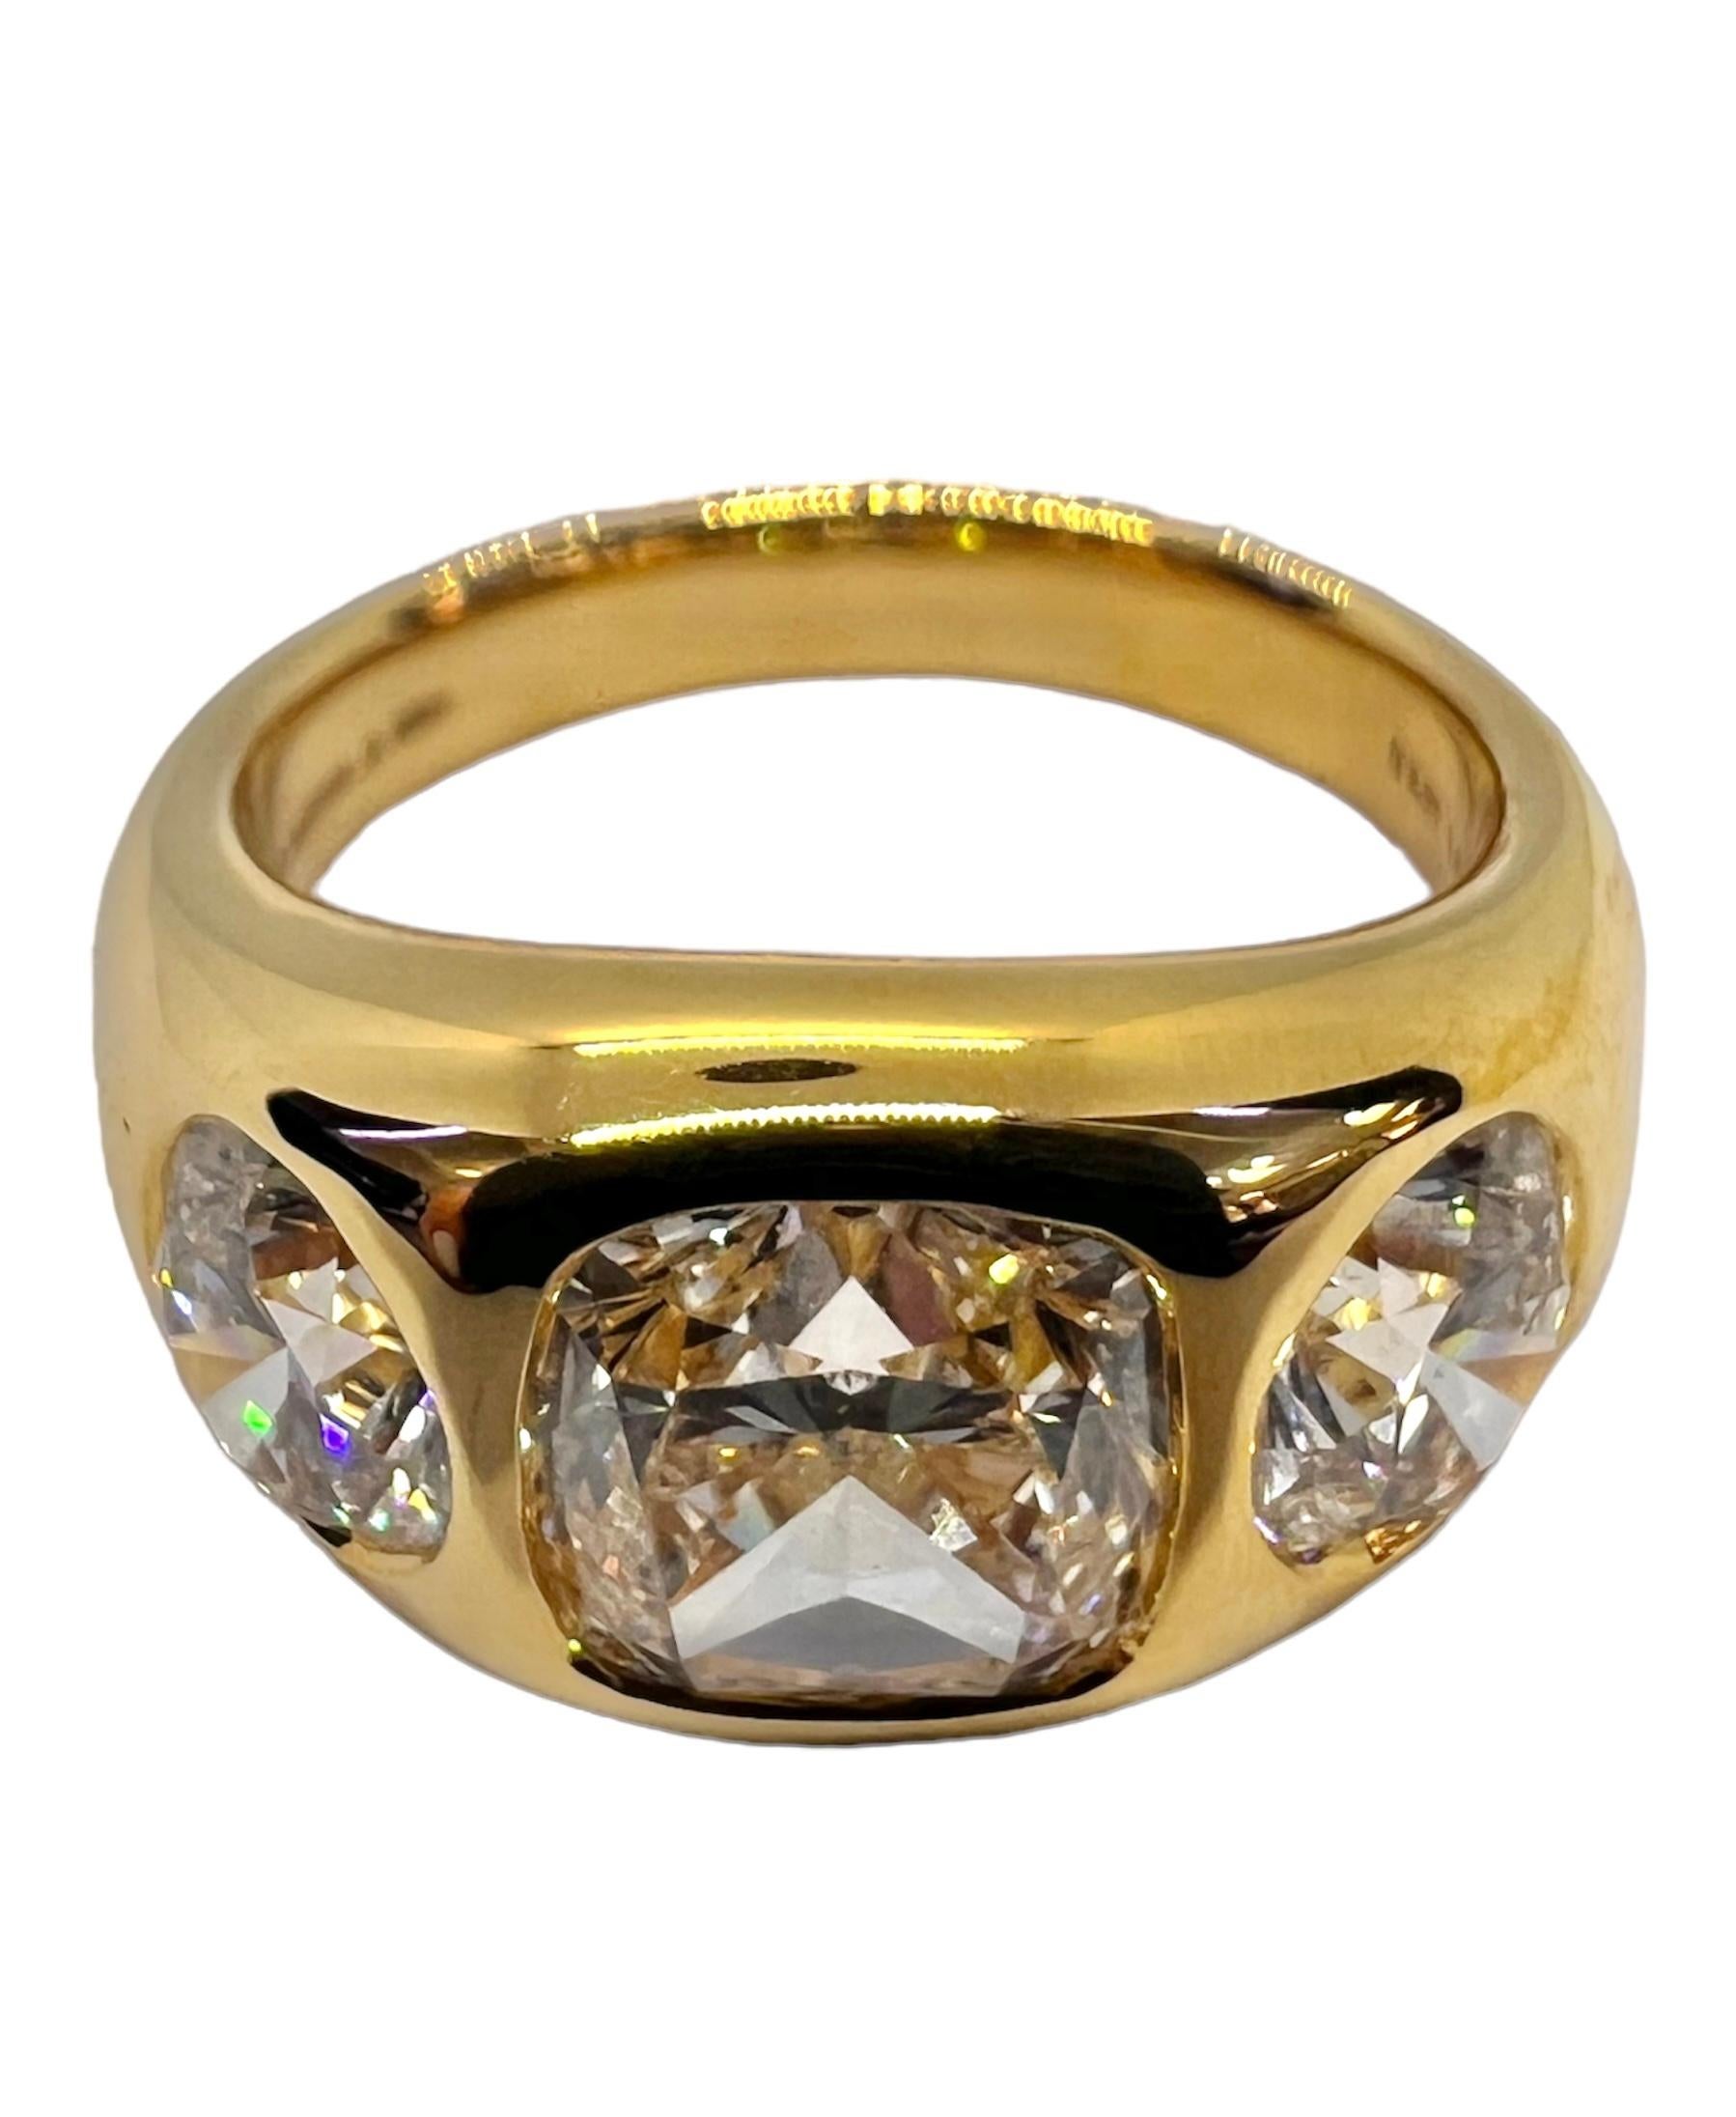 GIA certified ring in 18K yellow gold that features a 2.01 carat KVS1 carat cushion cut diamond, .71 carat and .70 carat JVS1 diamonds.

Sophia D by Joseph Dardashti LTD has been known worldwide for 35 years and are inspired by classic Art Deco